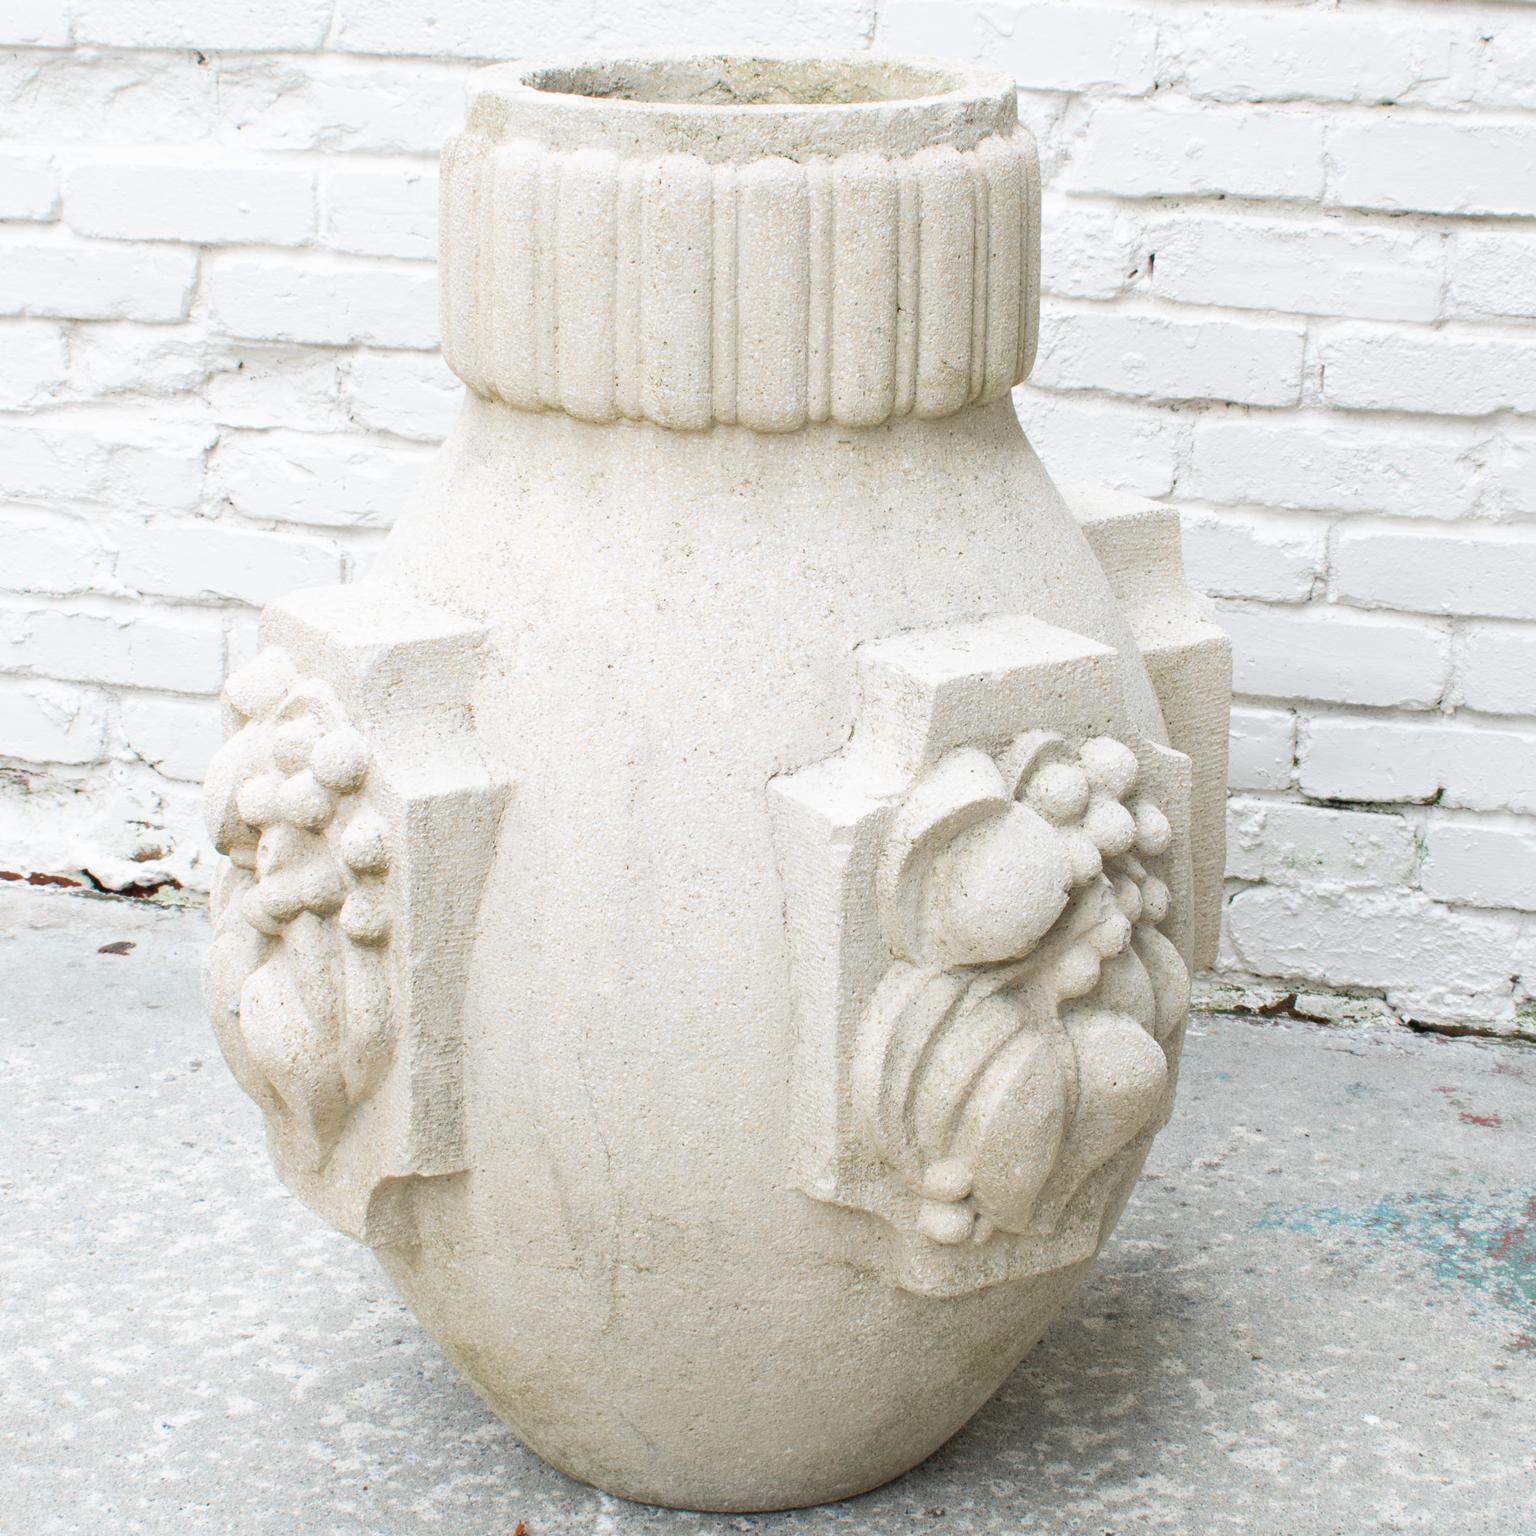 A rare monumental concrete planter or garden urn. This French Art Deco concrete jardiniere was reclaimed from the gardens of a mansion near Nice on the French Riviera. 
In the 1930s, concrete was a new, innovative, and avant-garde material that